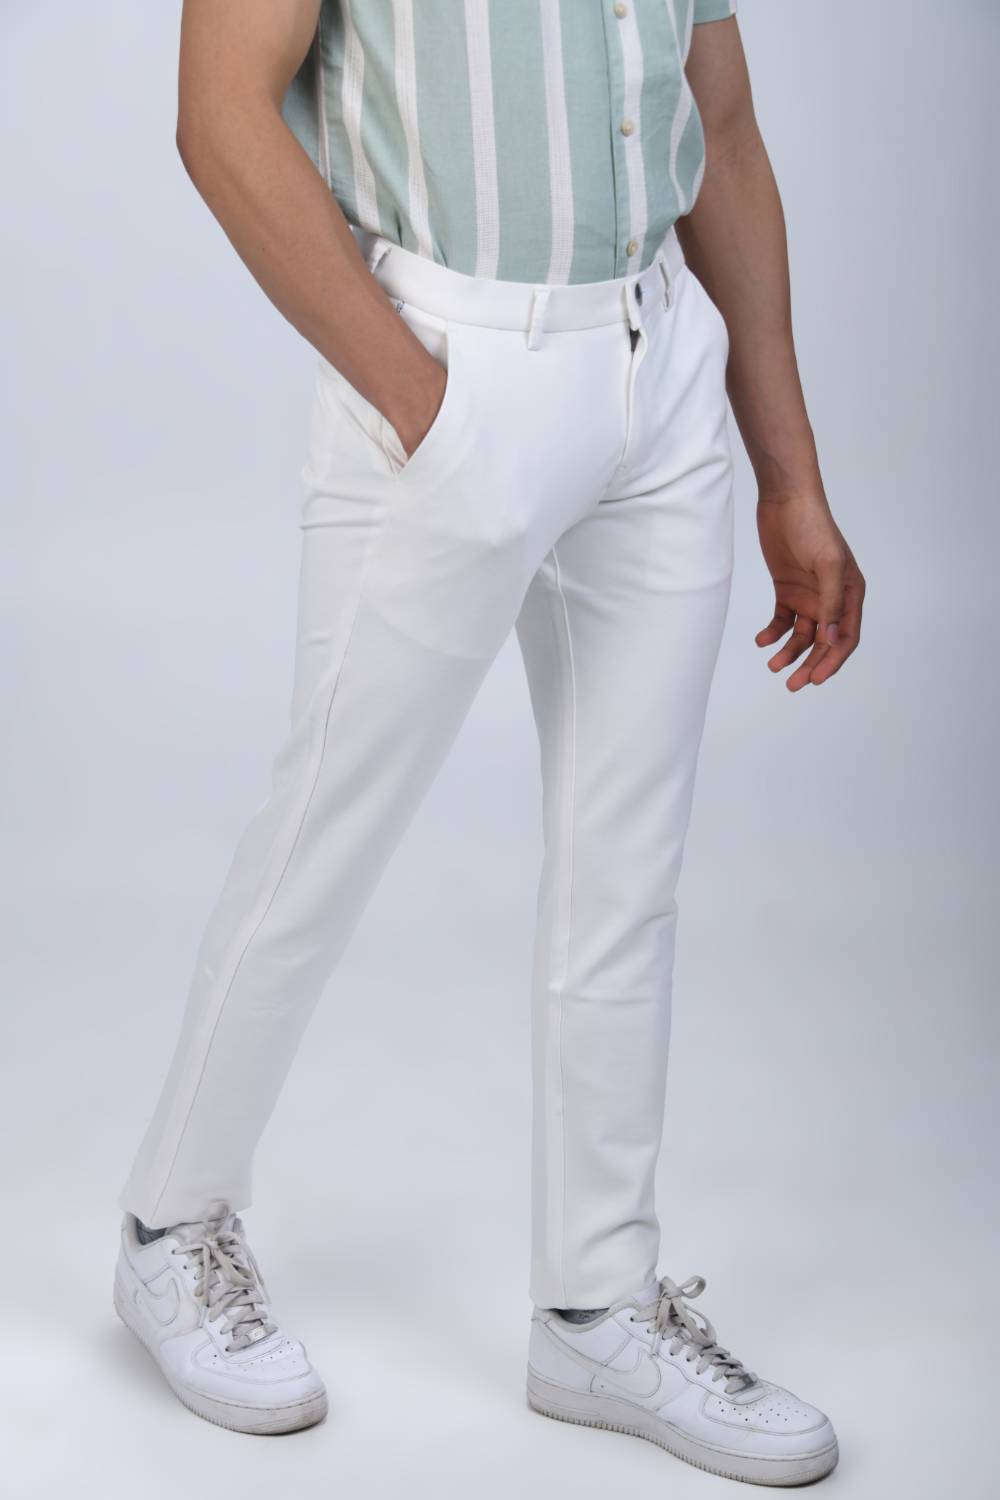 Buy YOLKI Formal Pants for Women, Winter Wear Off White Color, Size : Large  at Amazon.in